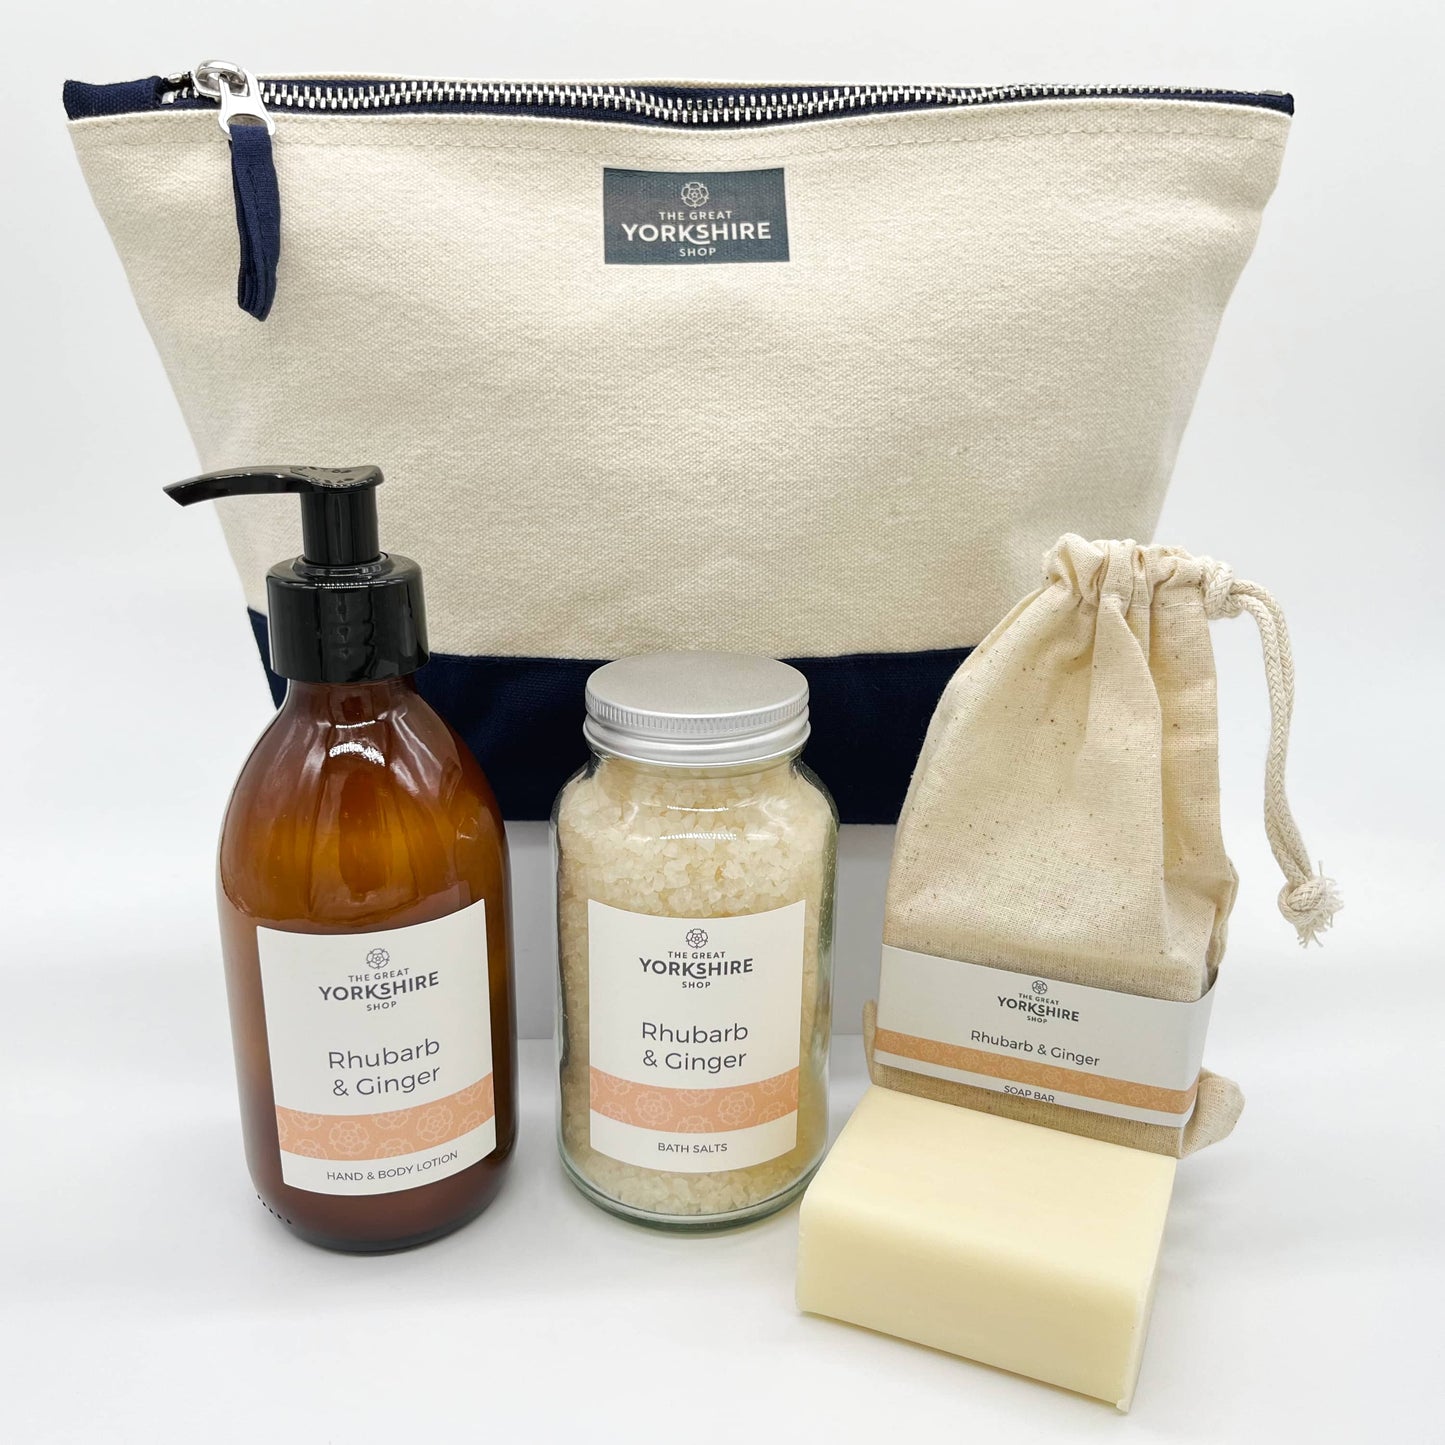 Rhubarb & Ginger Hand & Body Gift Set - The Great Yorkshire Shop